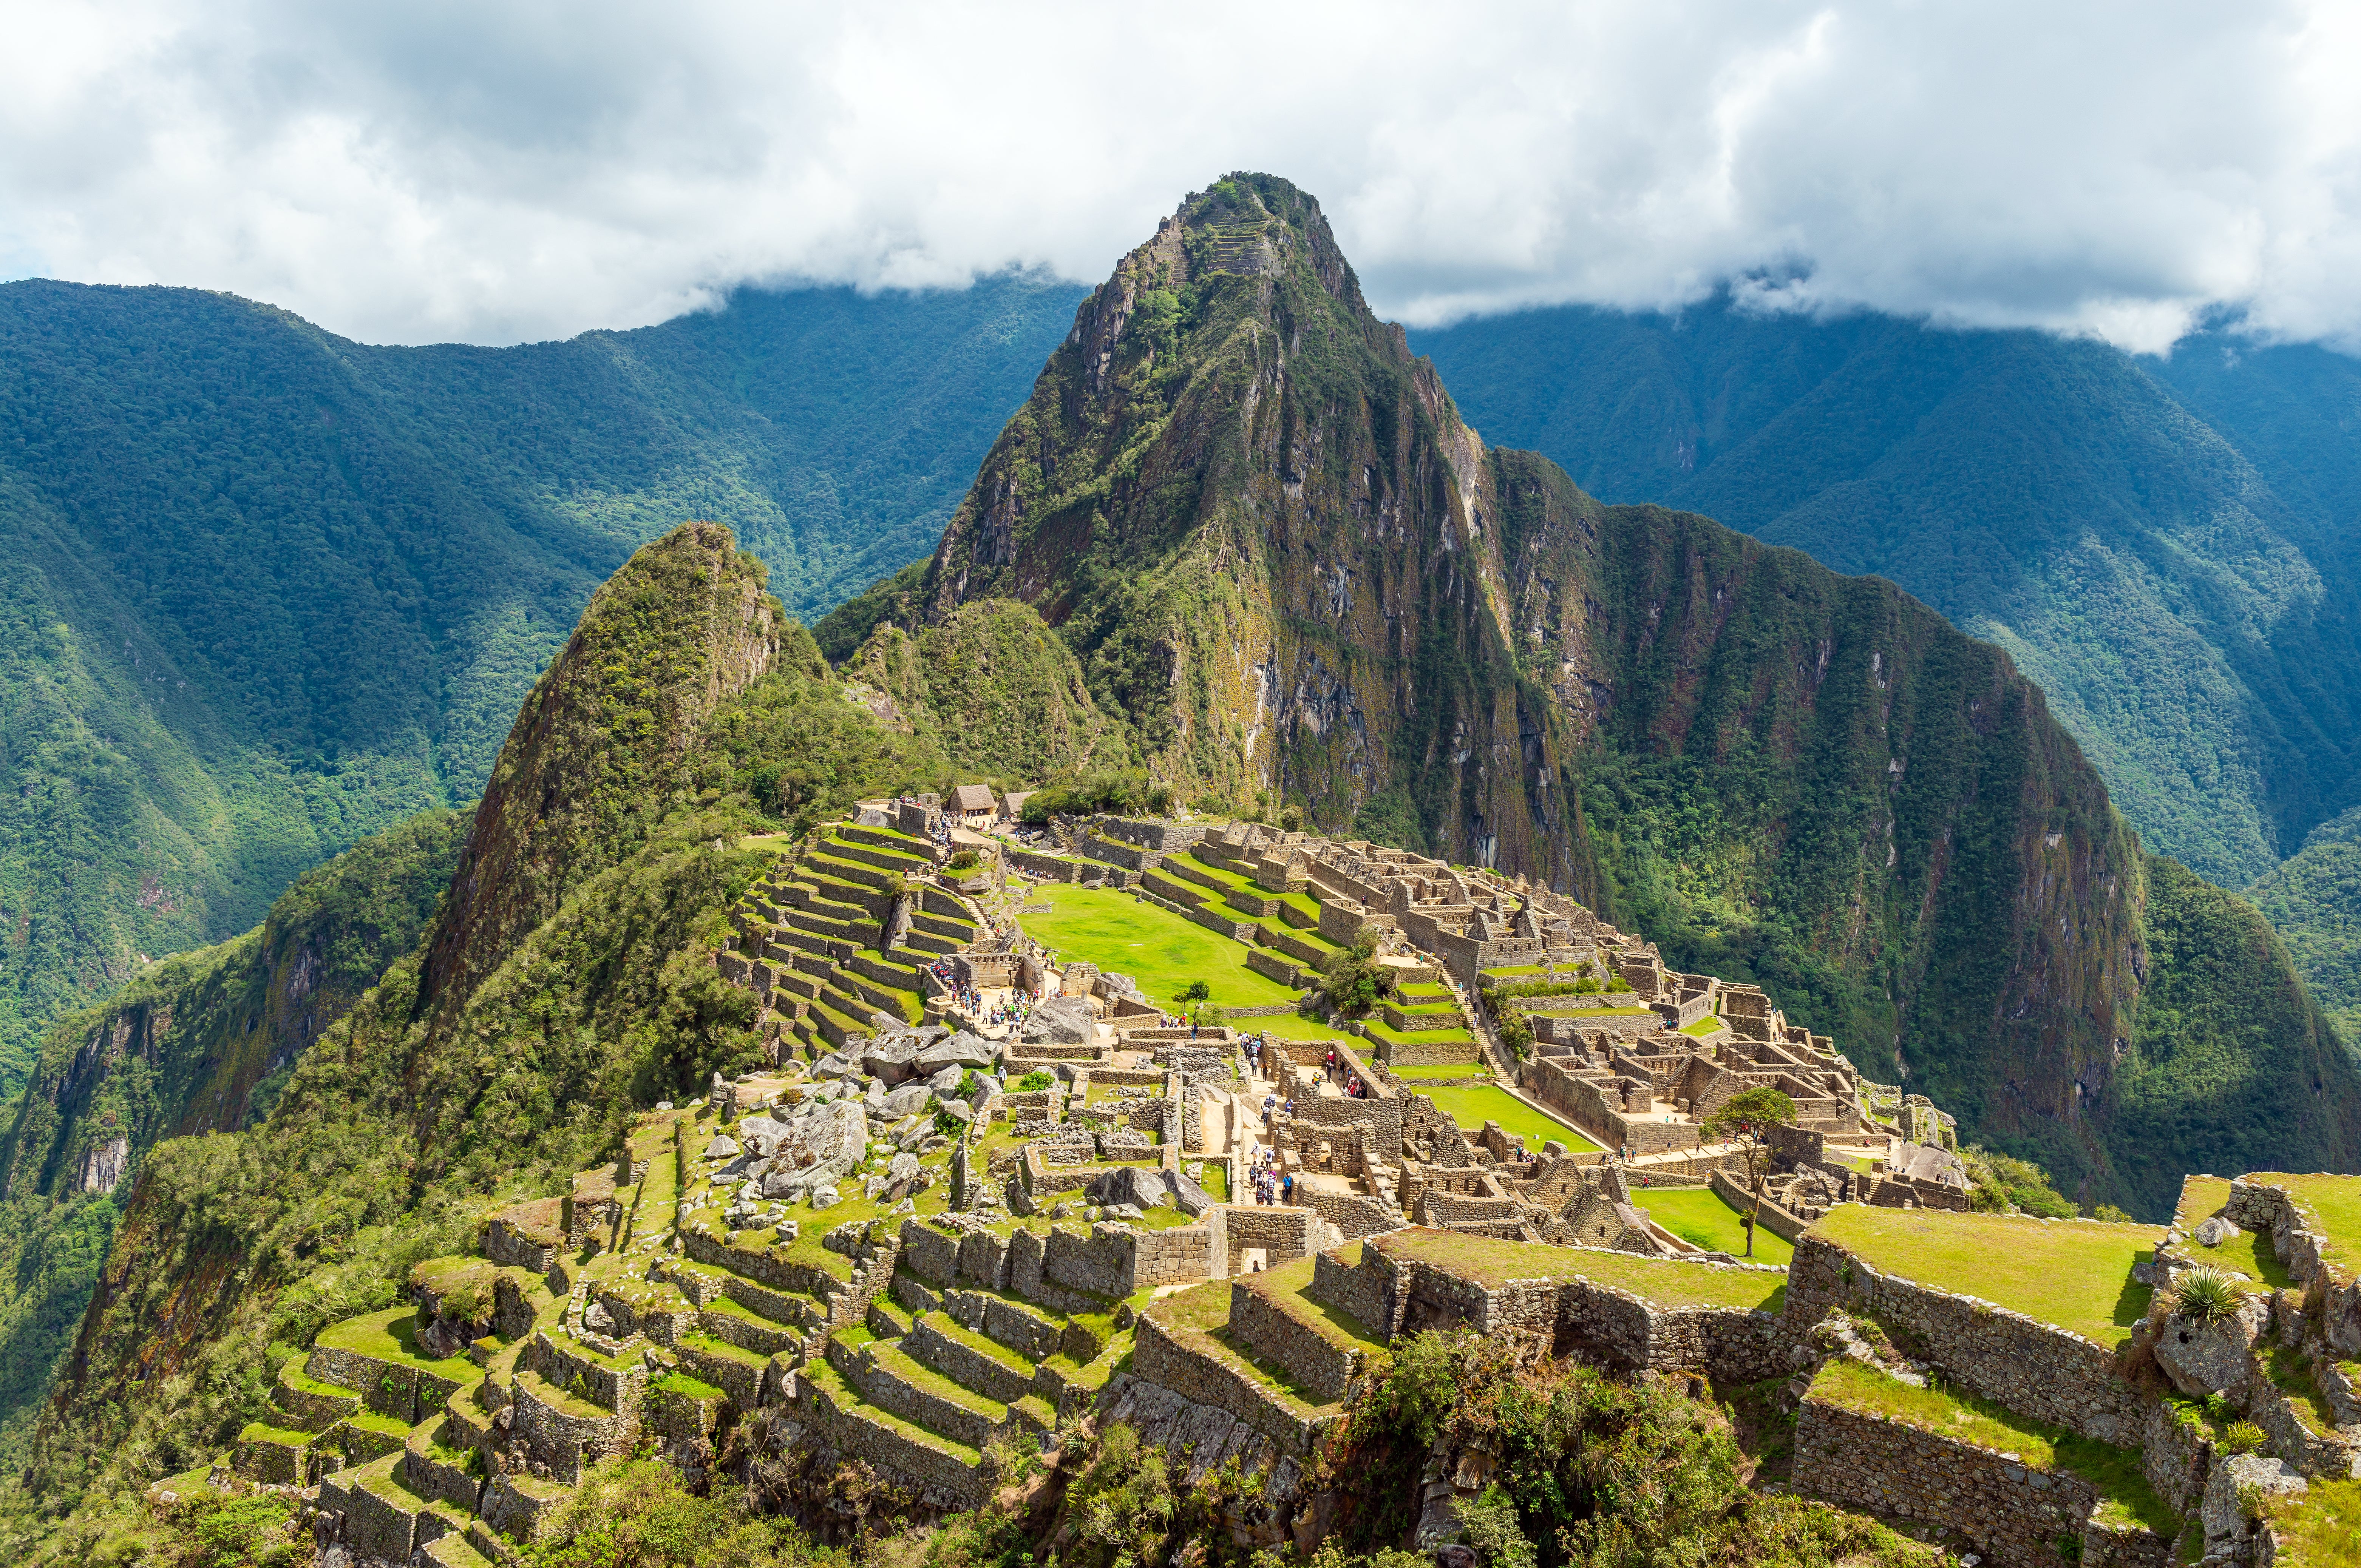 Hundreds of tourists have been left stranded in Machu Picchu following protests in Peru